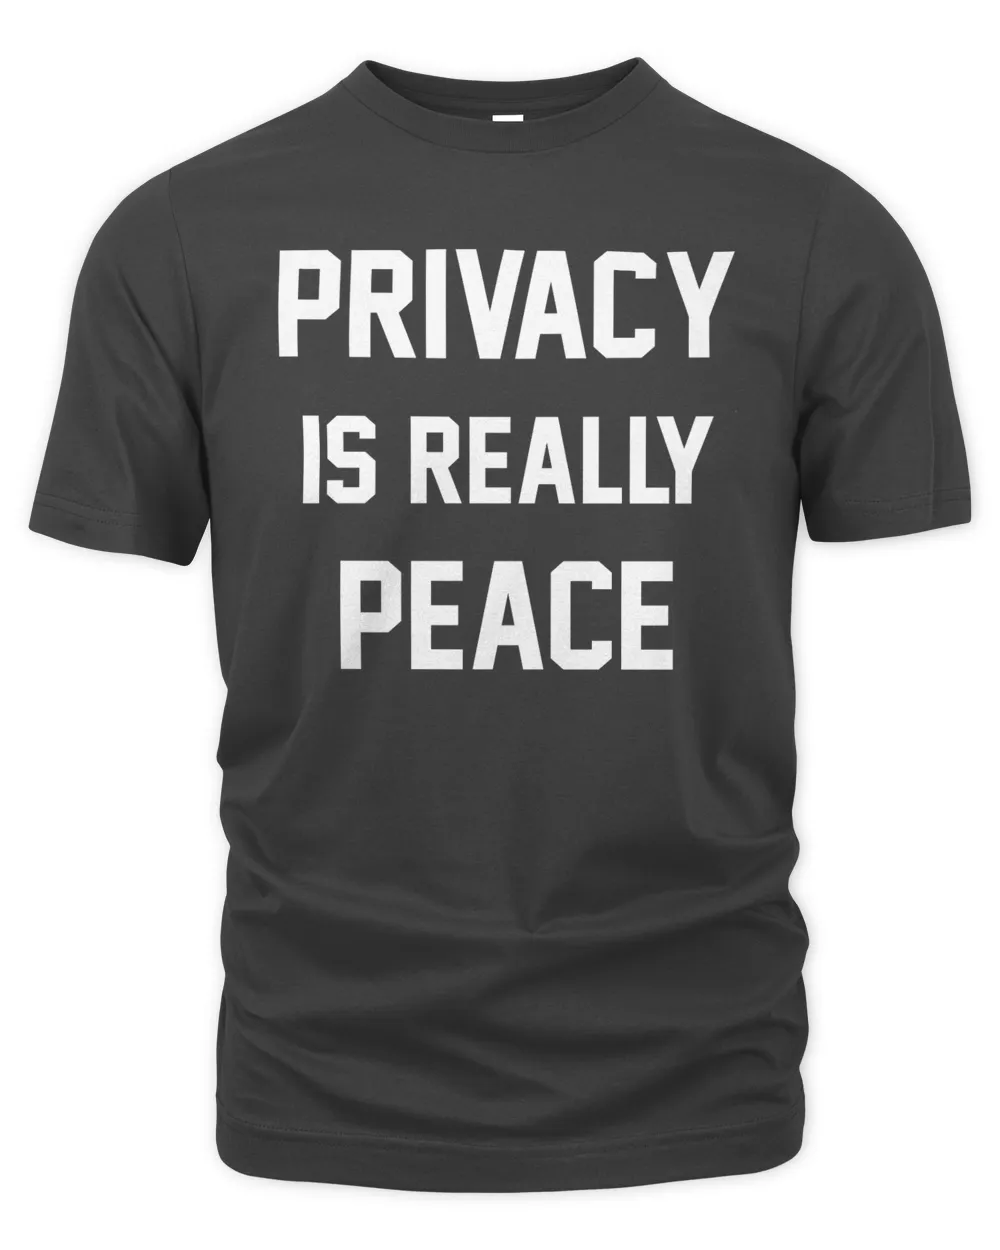 Privacy Is Really Peace Shirt